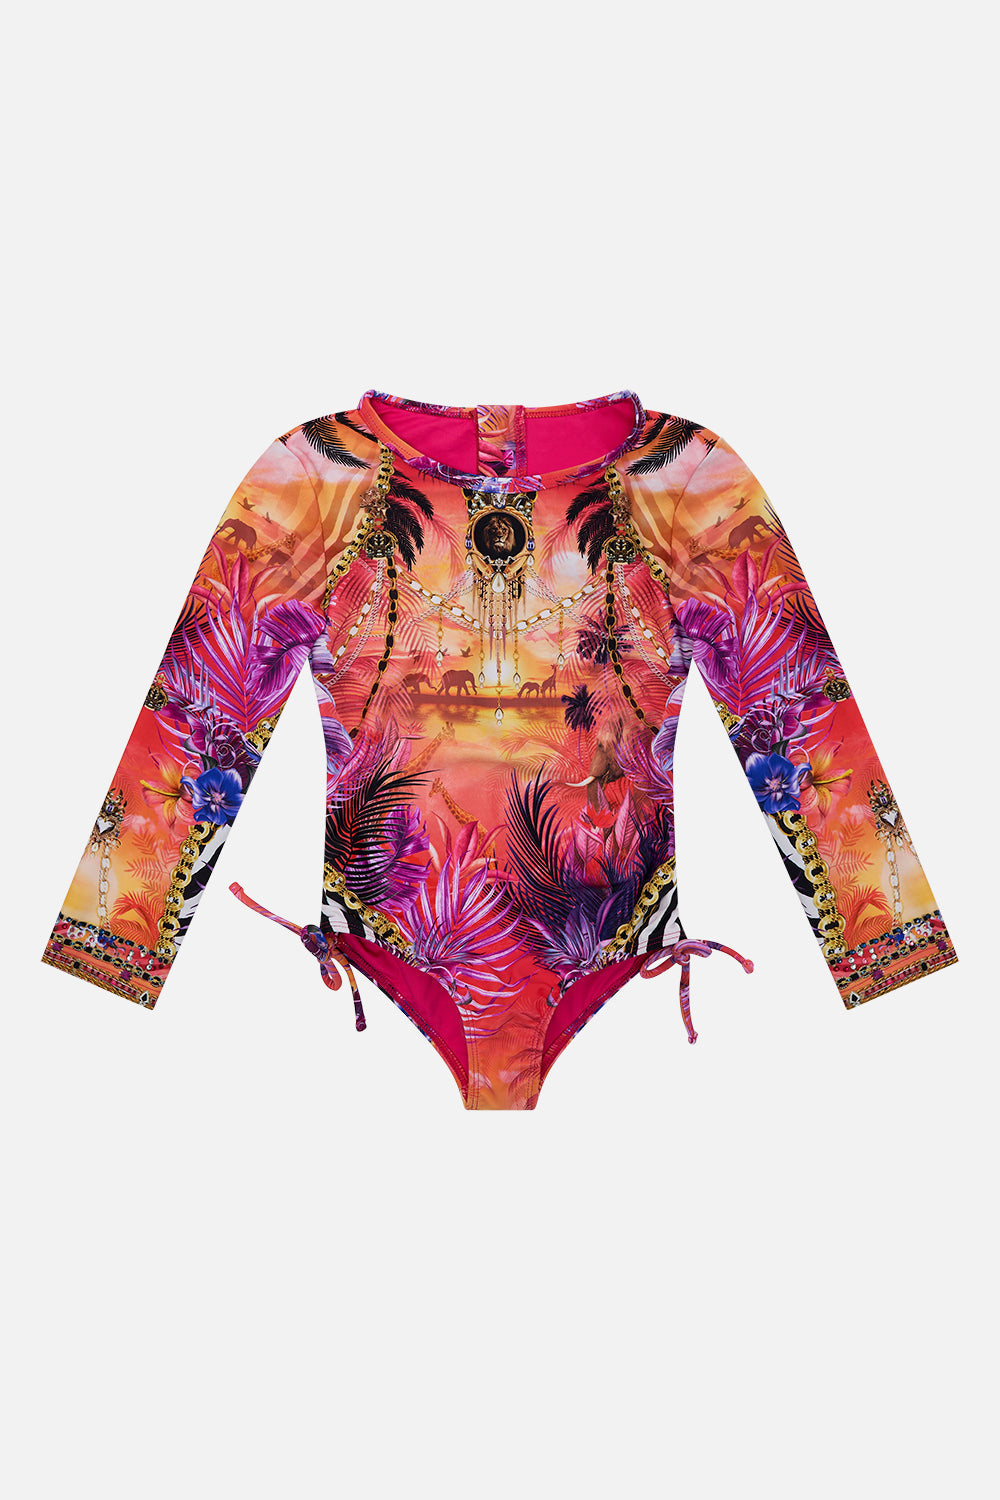 Product View of MILLA By CAMILLA kids paddlesuit in Wild Loving print